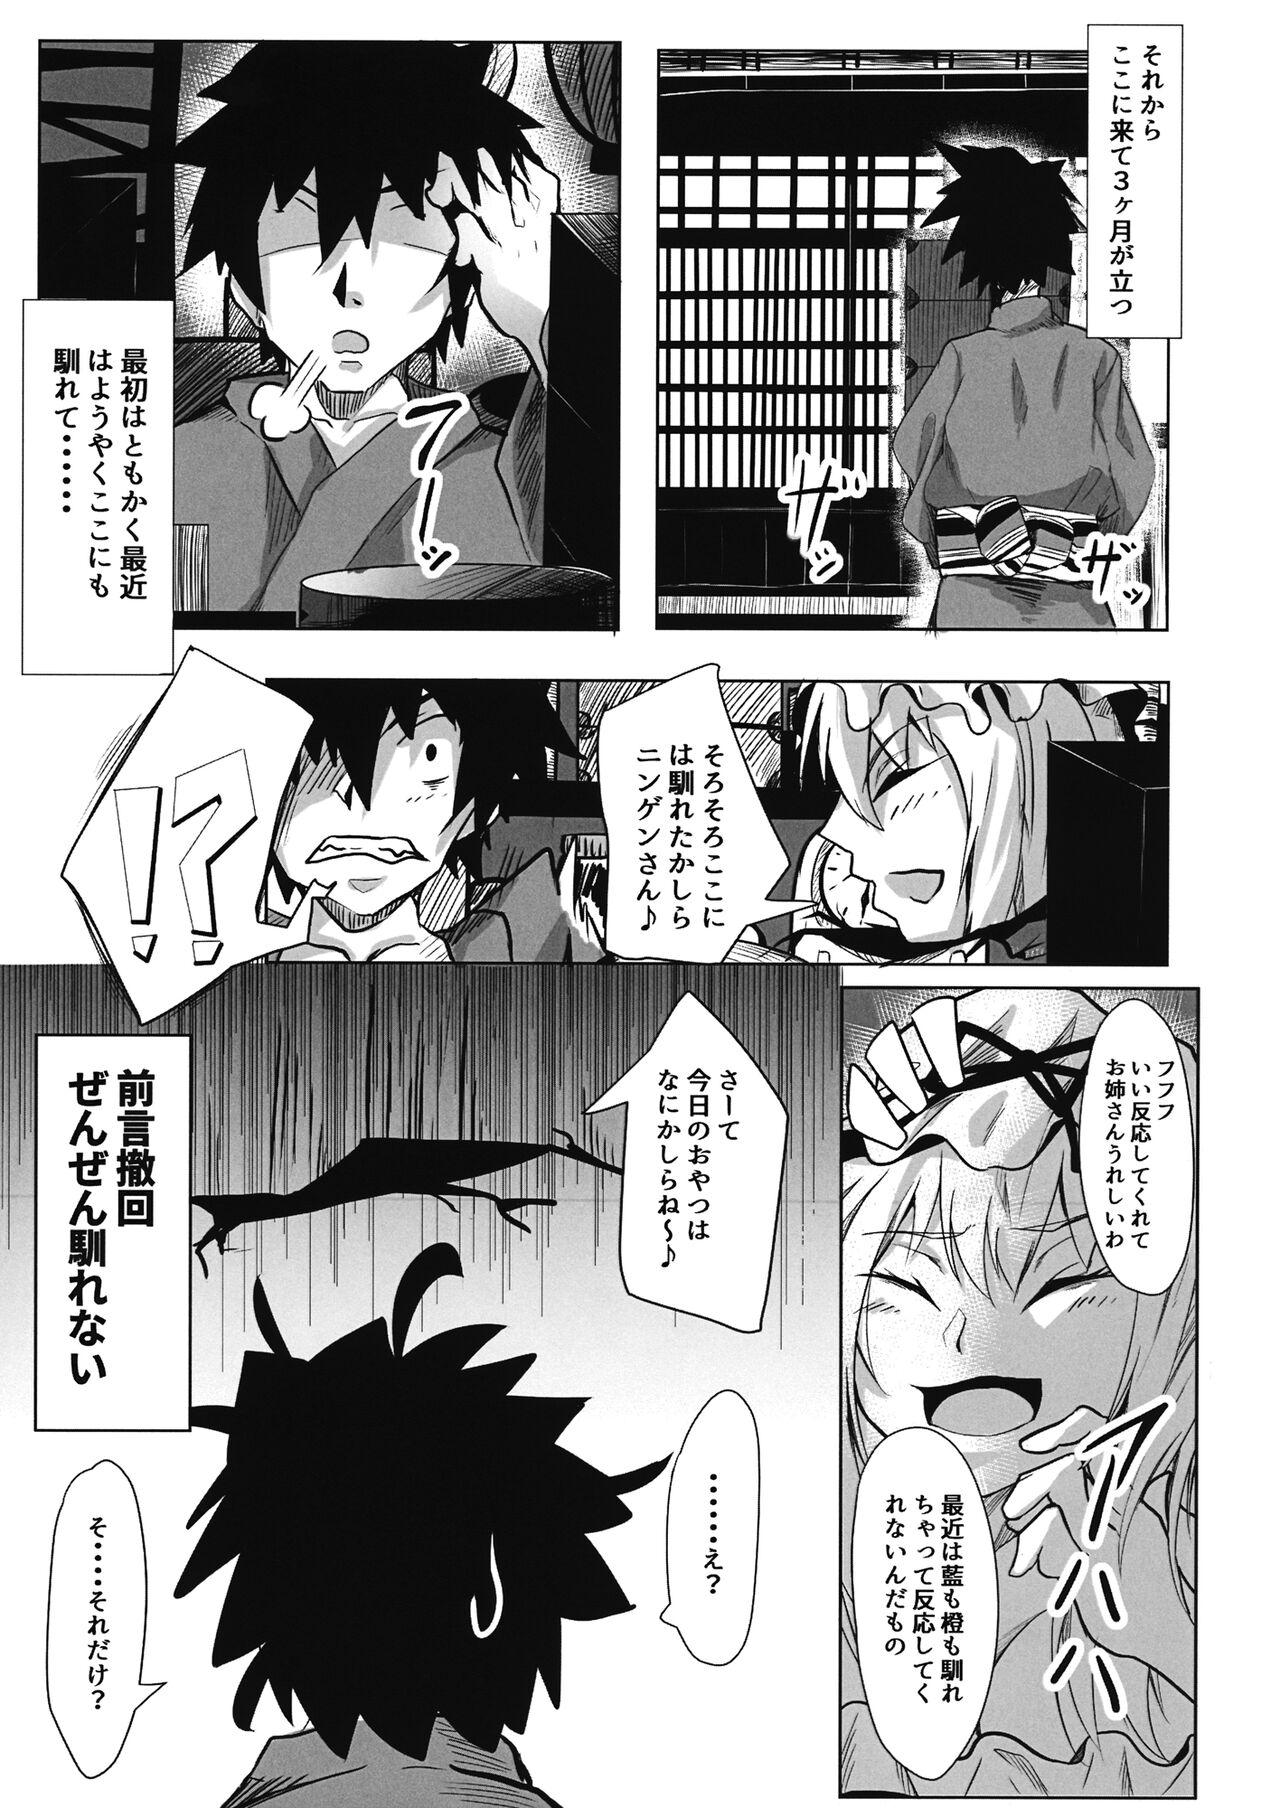 Old Man Oideyo! Gensoukyou - Touhou project Sister - Page 6